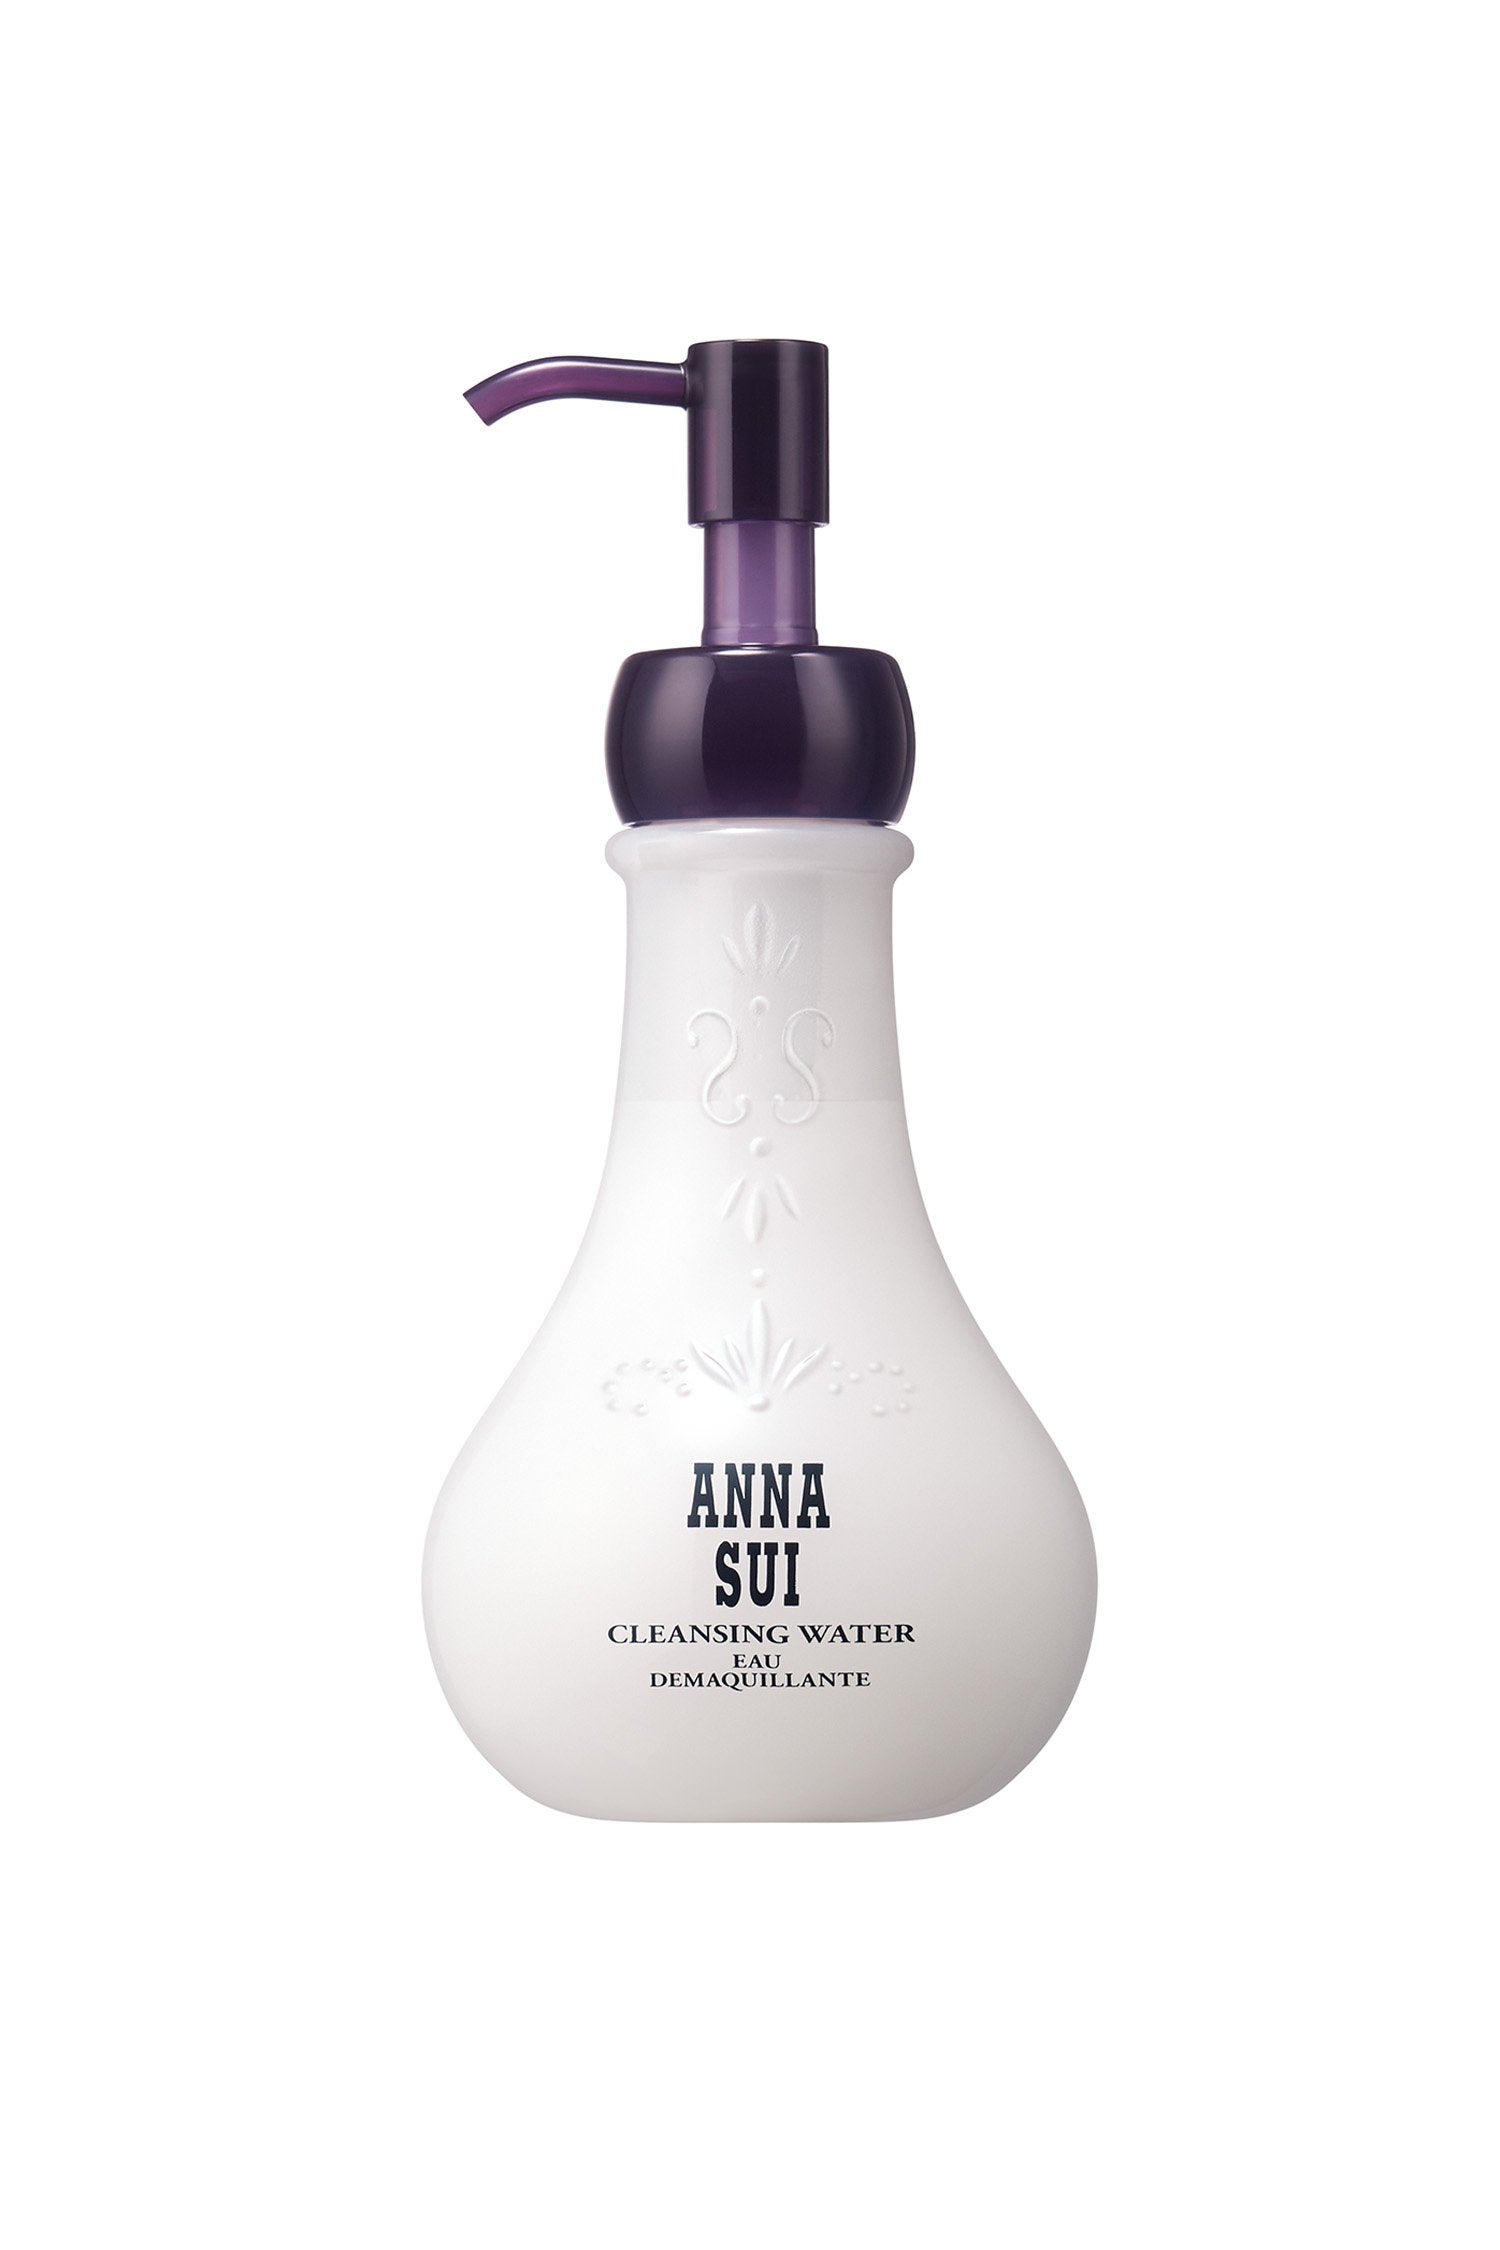 Cleansing water: in a cream-white, bulb-shaped container, floral design and Anna branding, the dispenser is dark purple